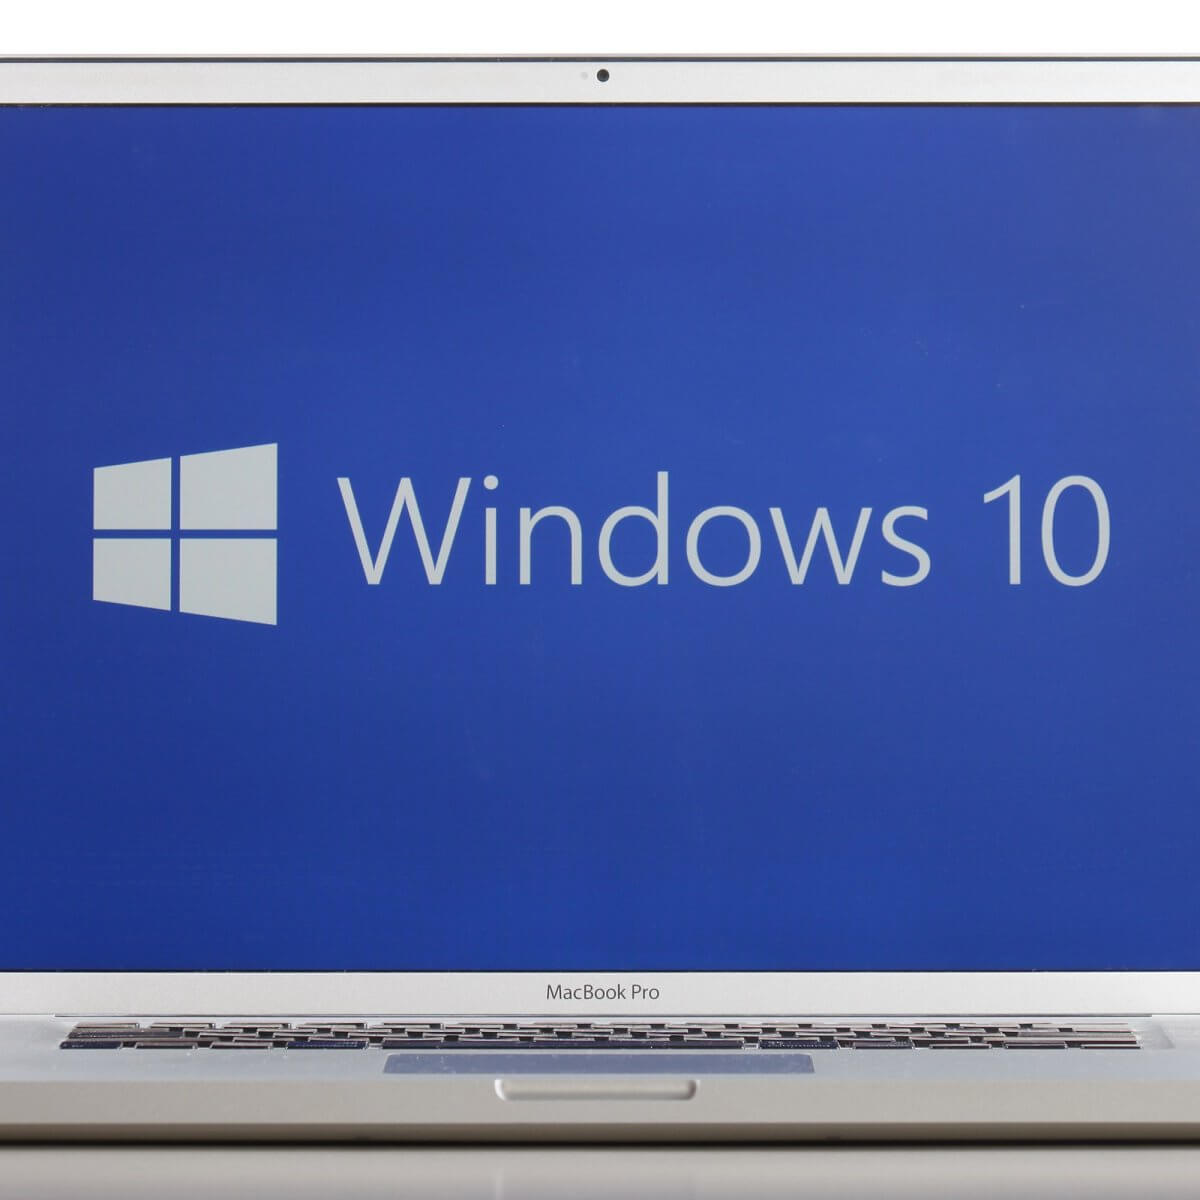 can you download windows 10 for free on mac